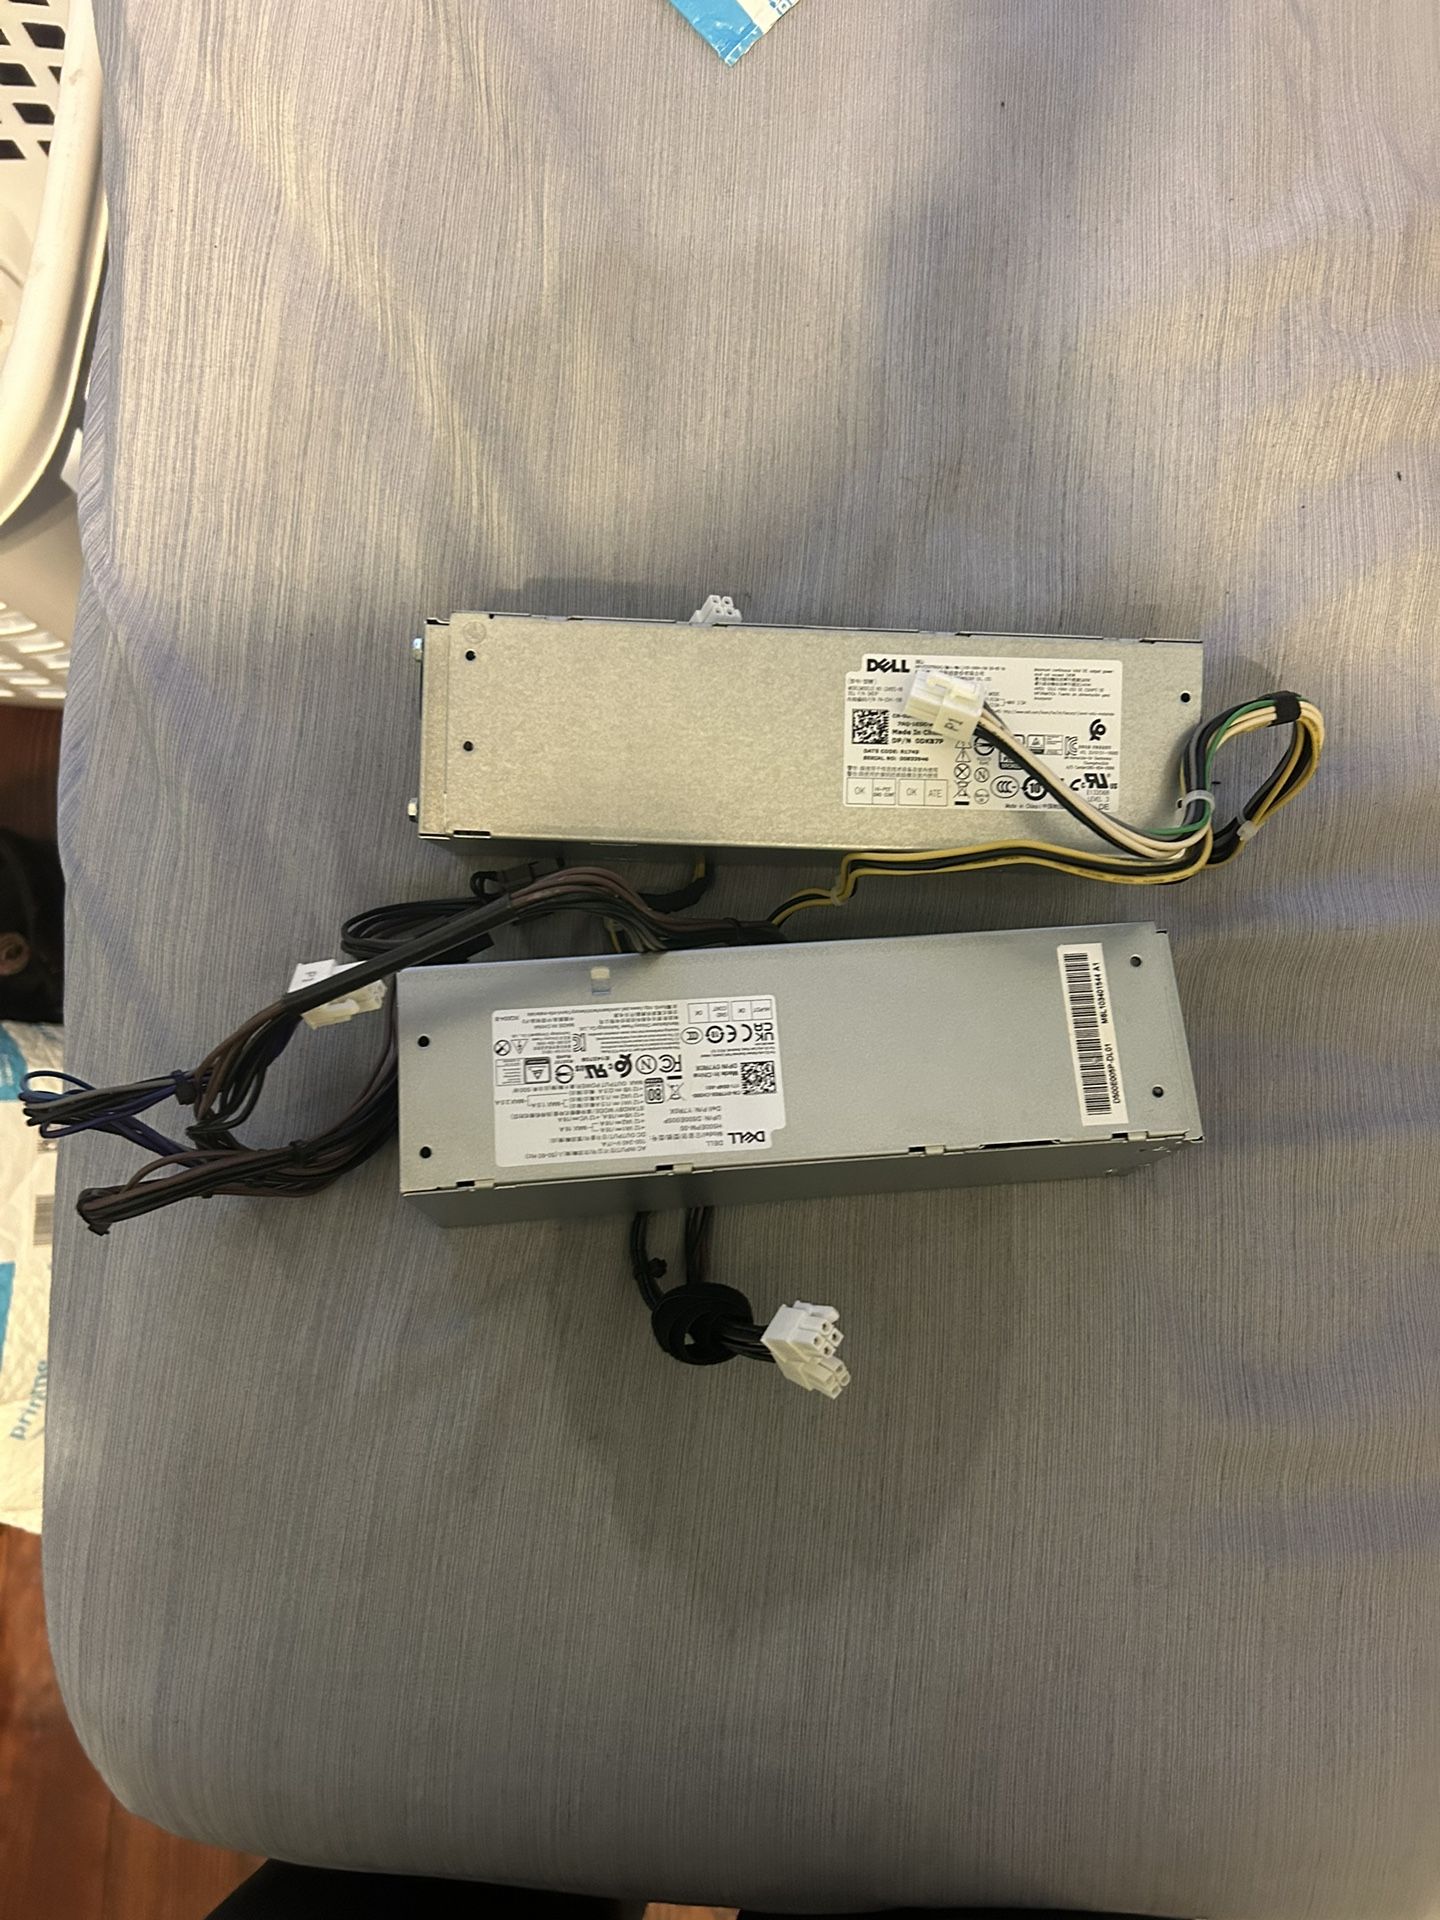 500w And 240w Dell Power Supply